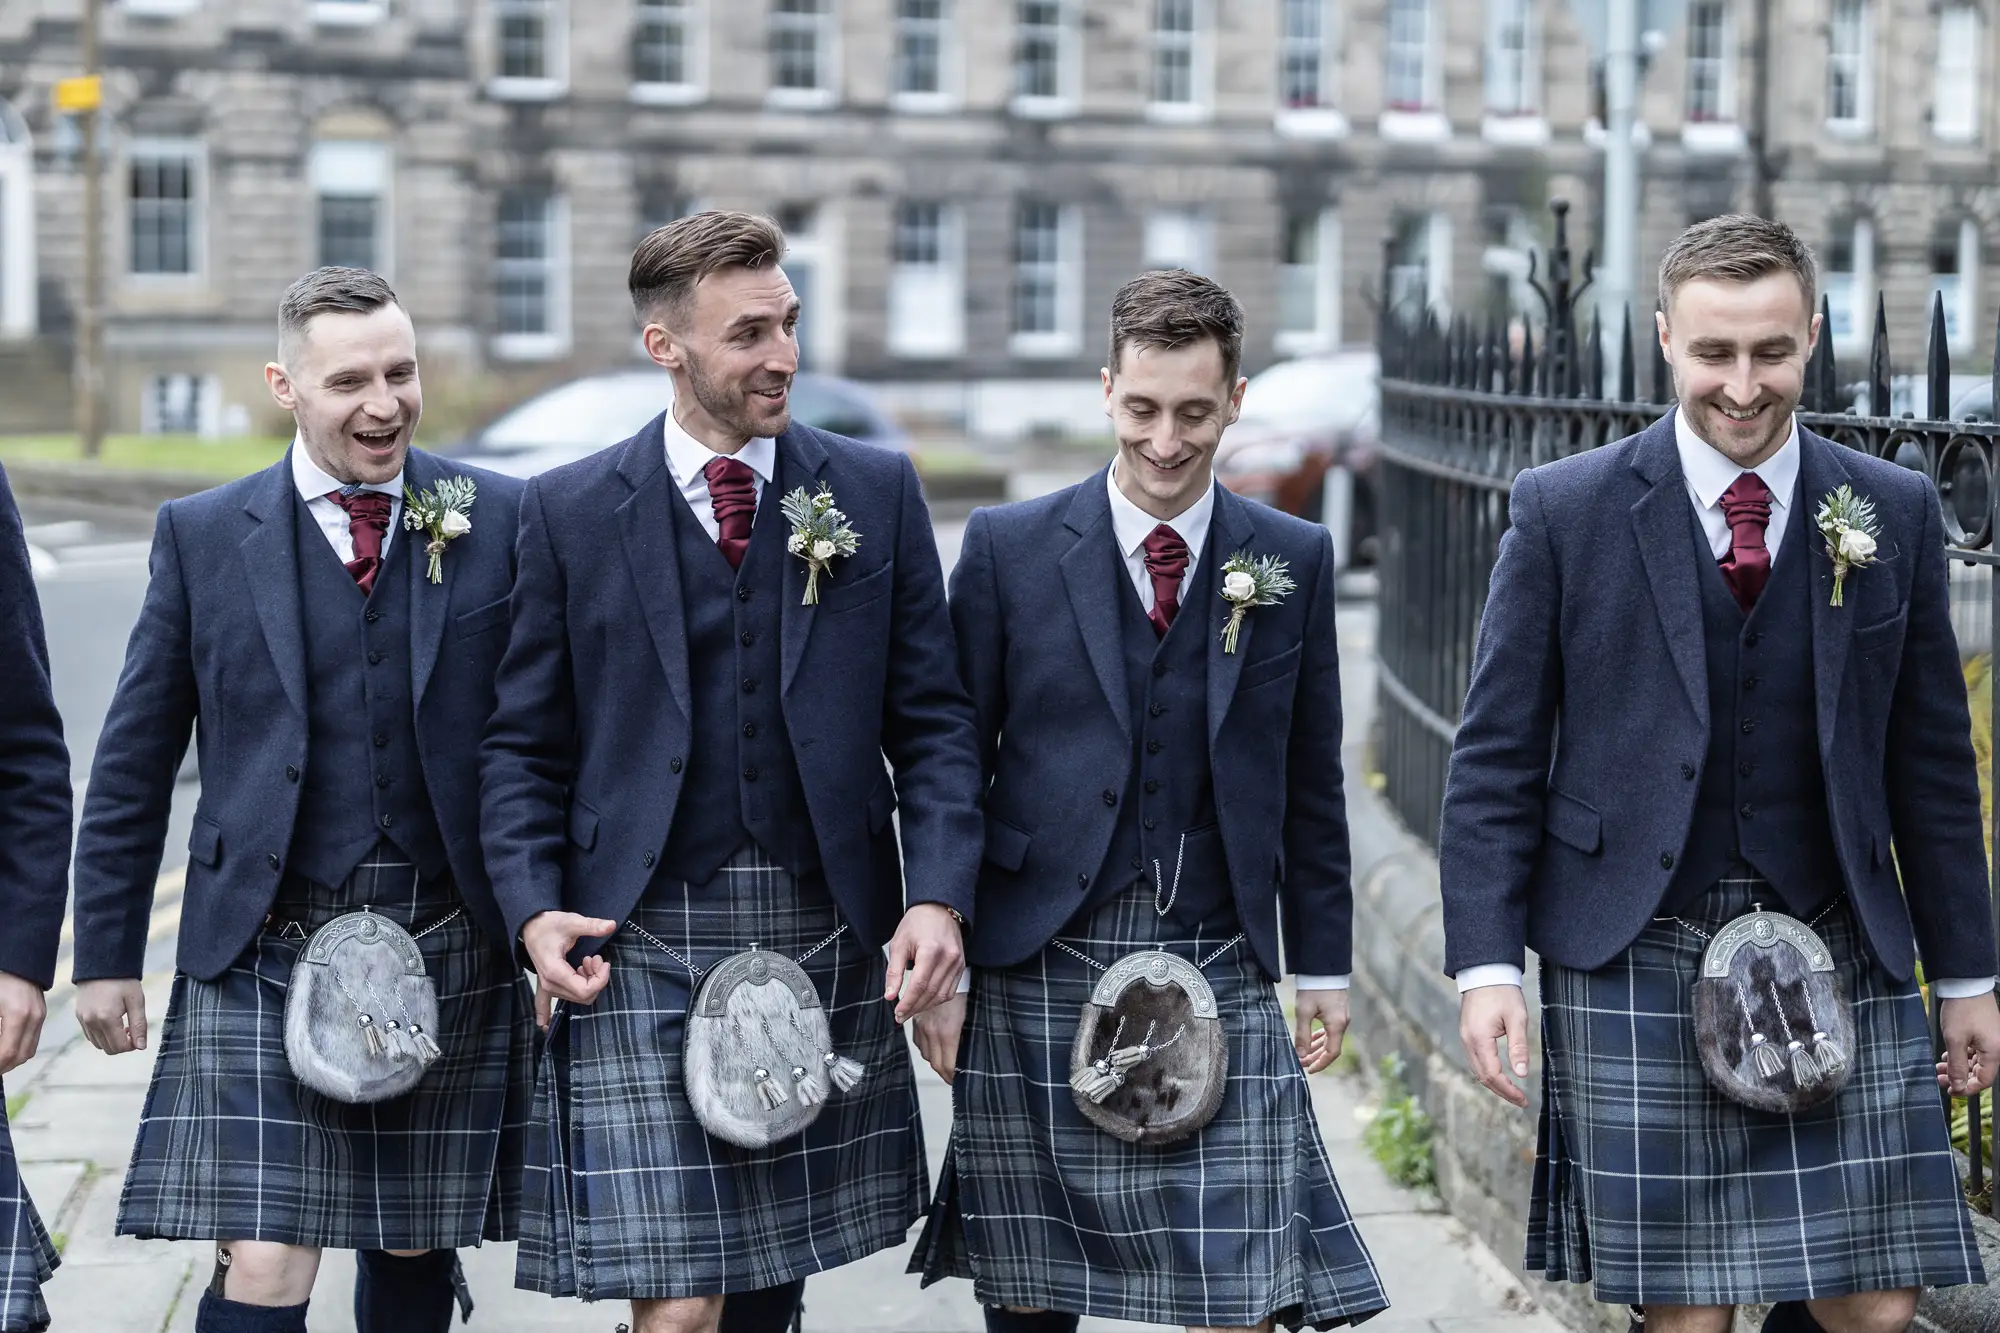 Four men in tartan kilts and jackets, laughing and walking together, each wearing a boutonniere and holding a sporran.